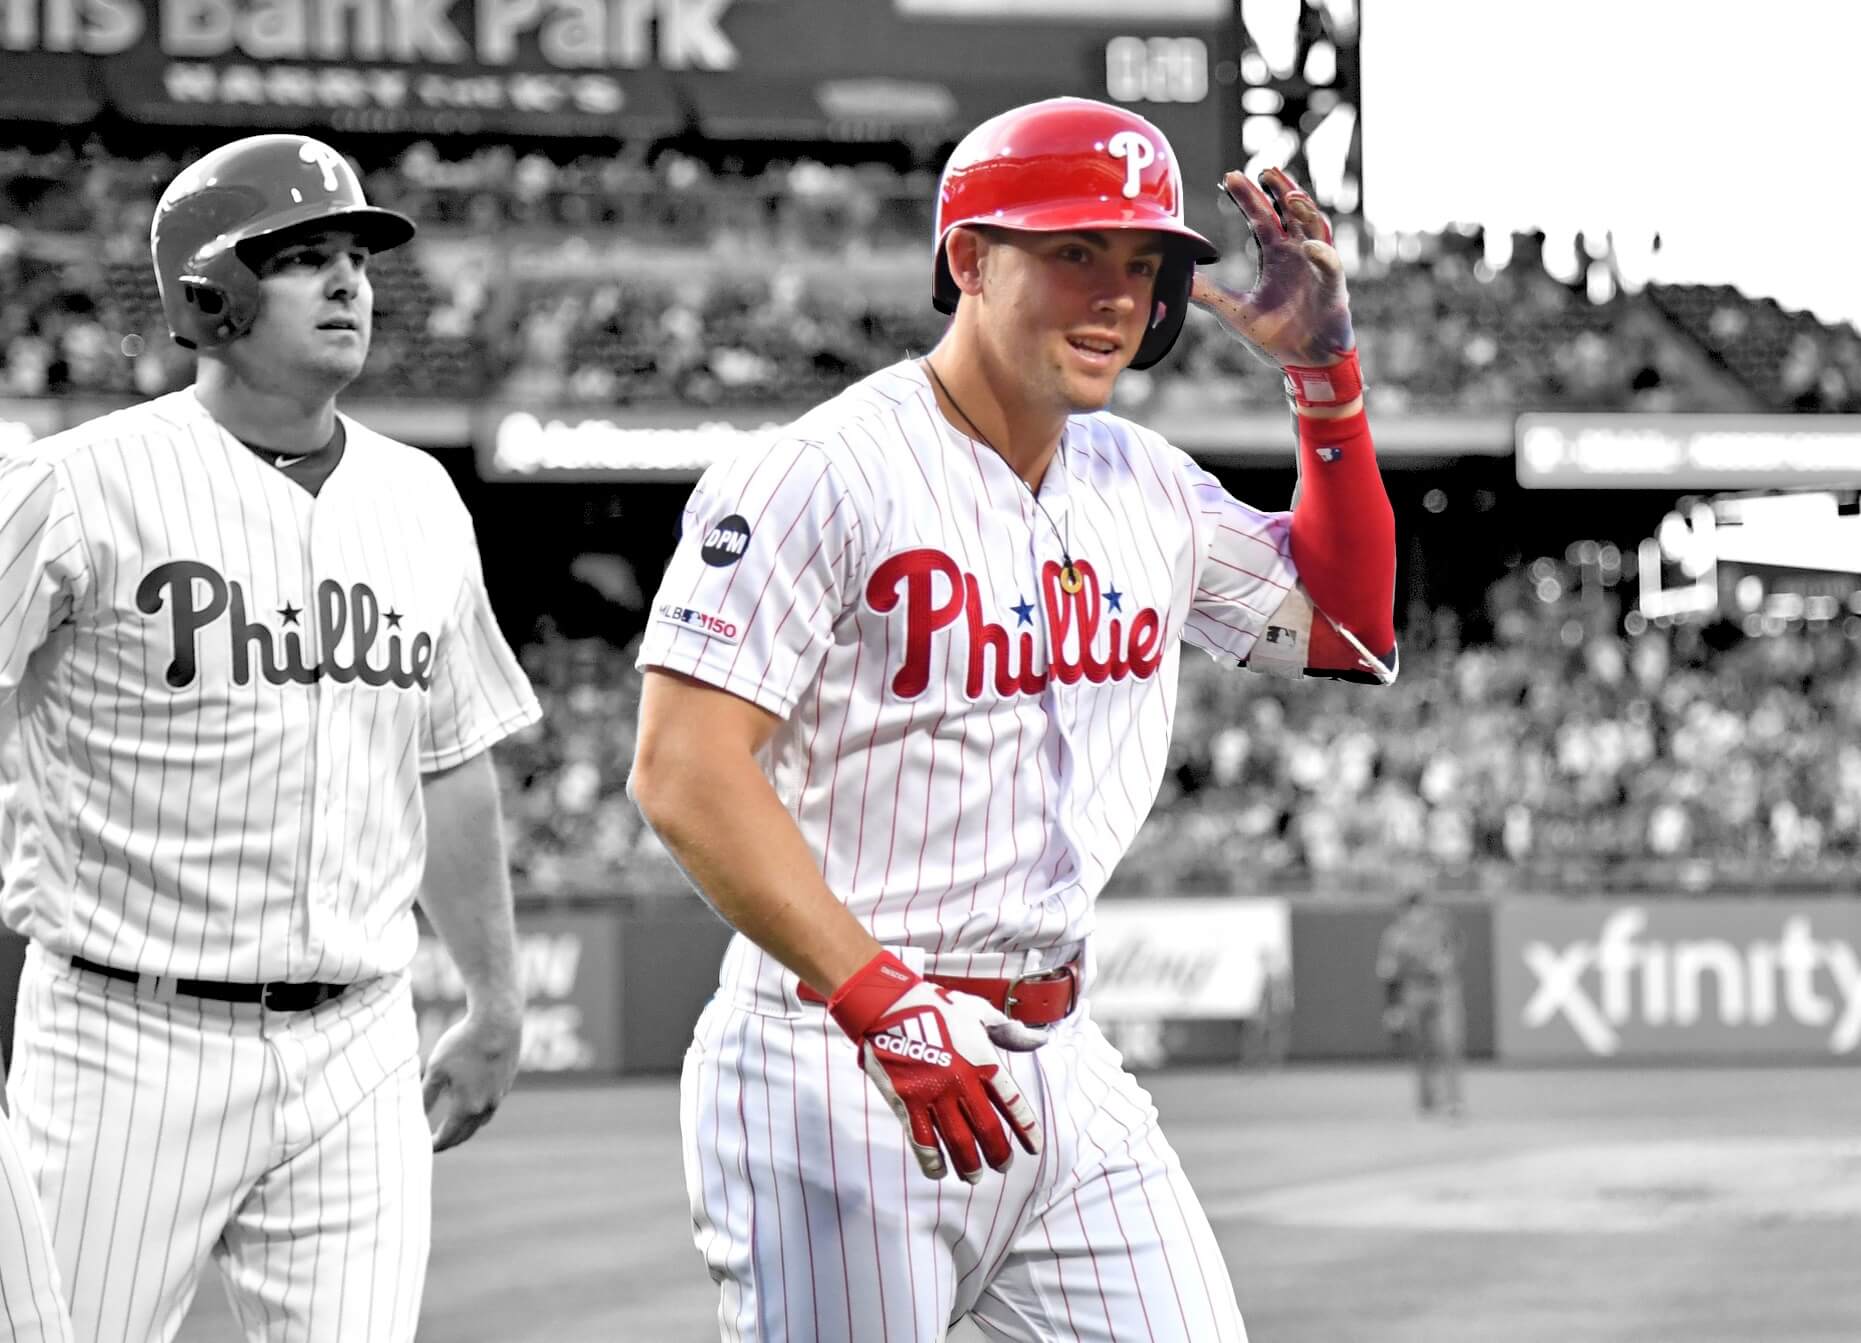 New and improved Scott Kingery is Keeping the Phillies afloat